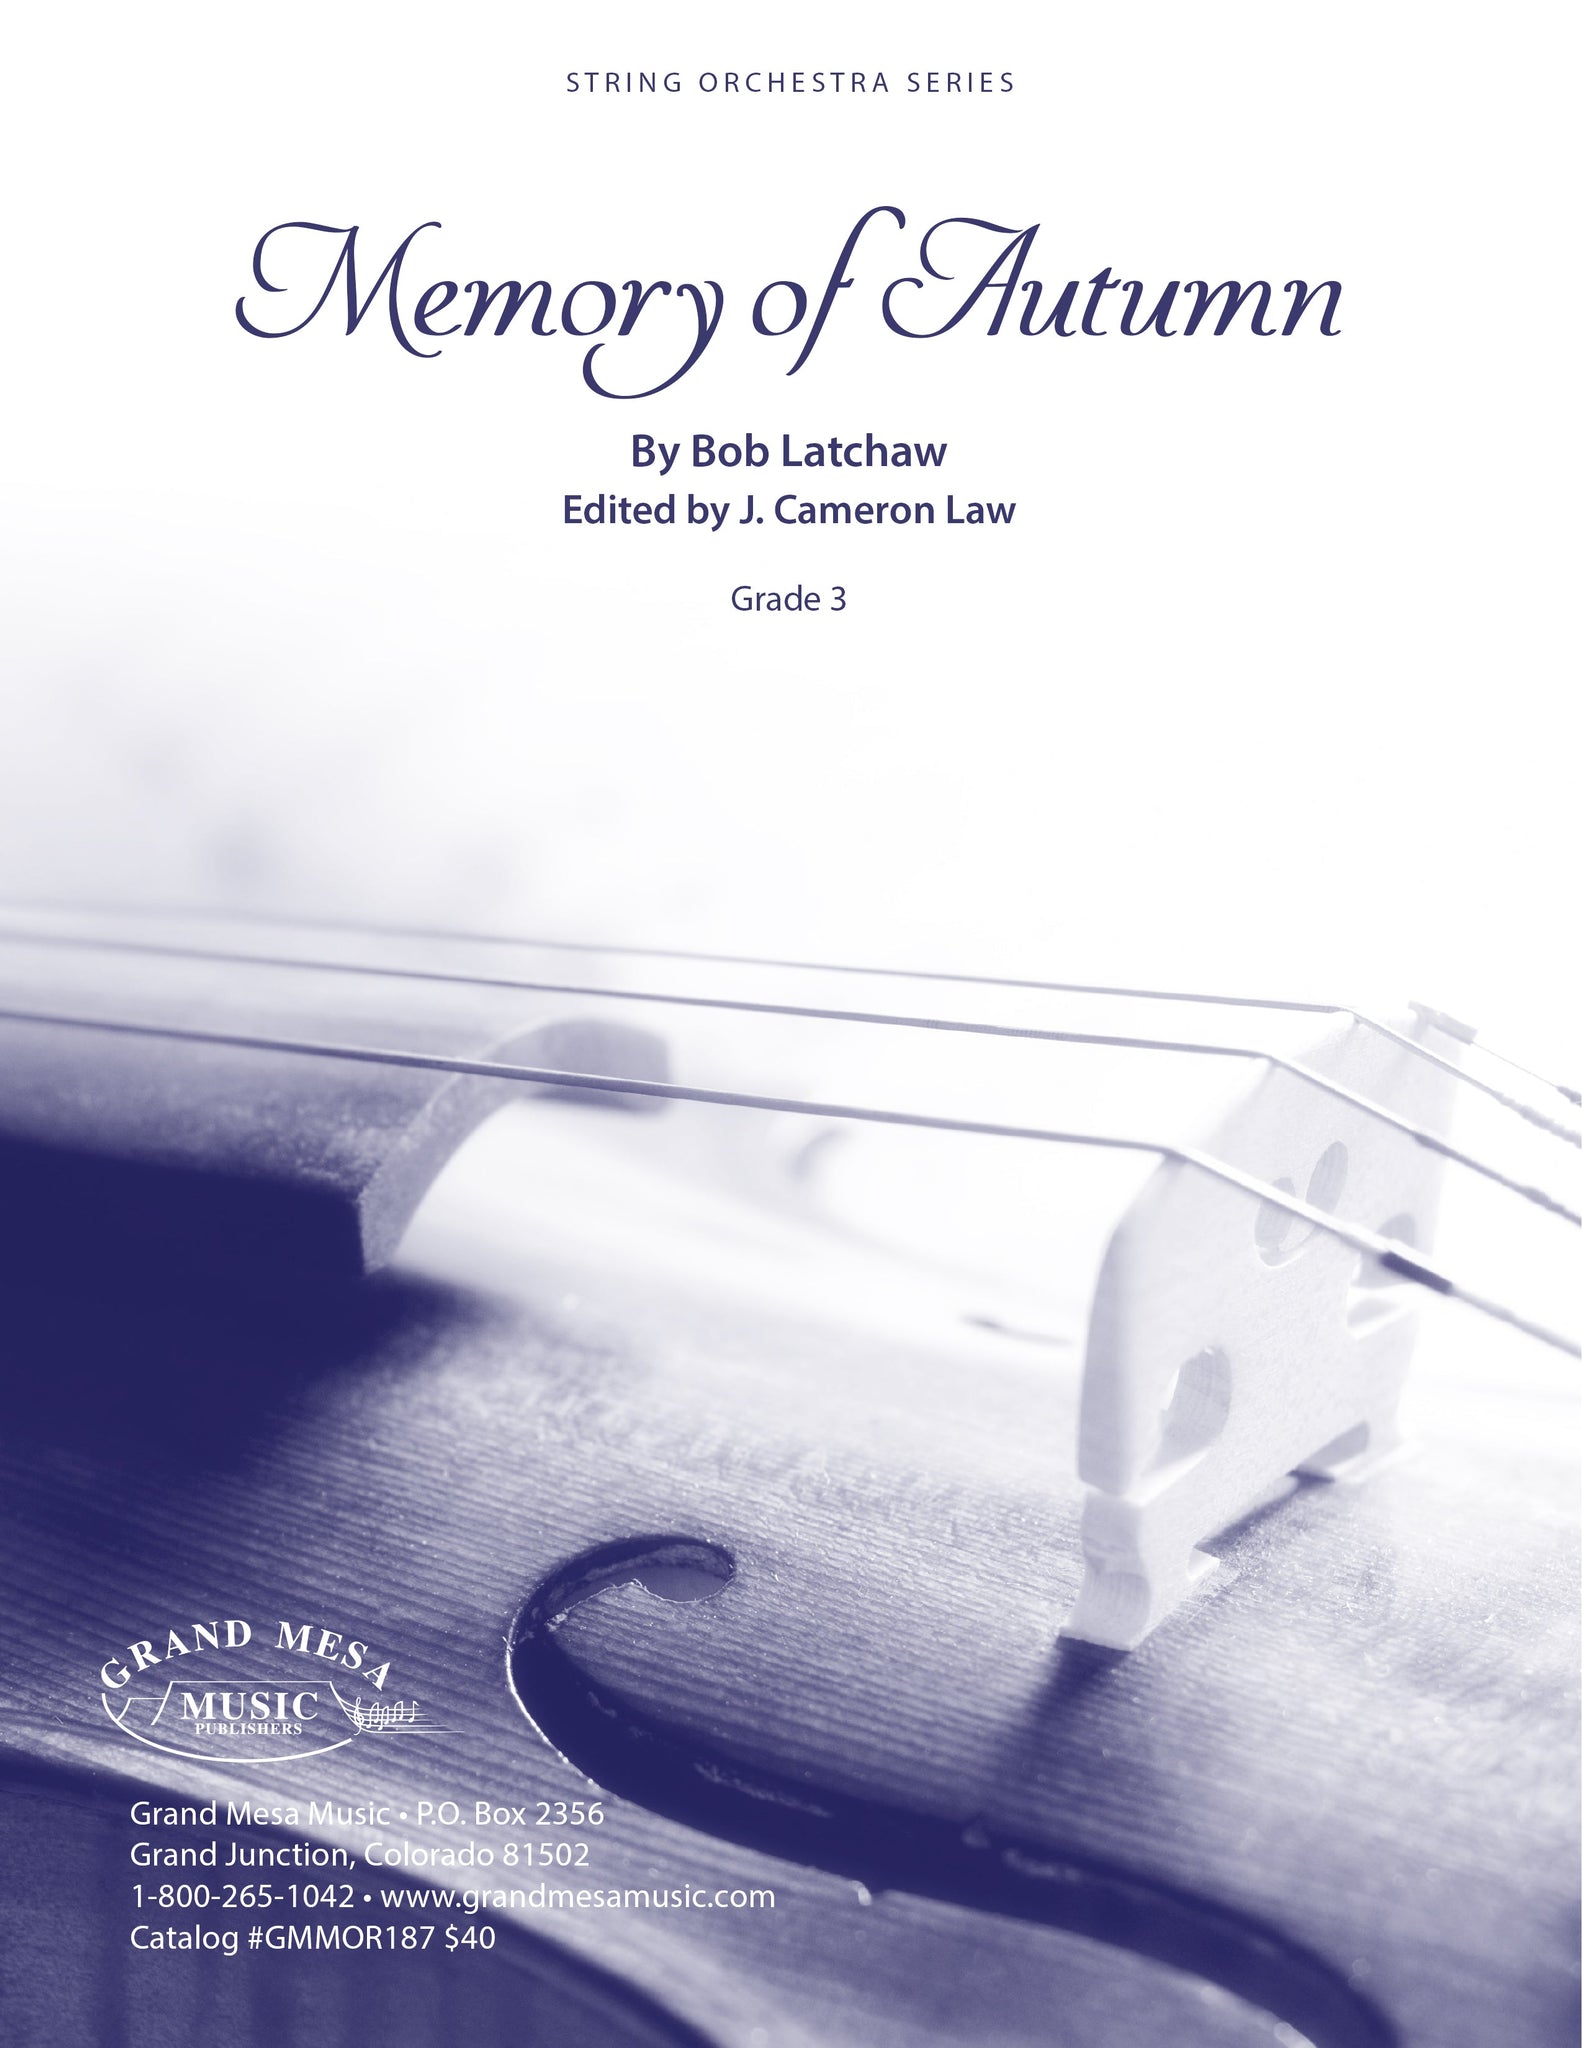 Strings sheet music cover of Memory of Autumn, composed by Bob Latchaw.